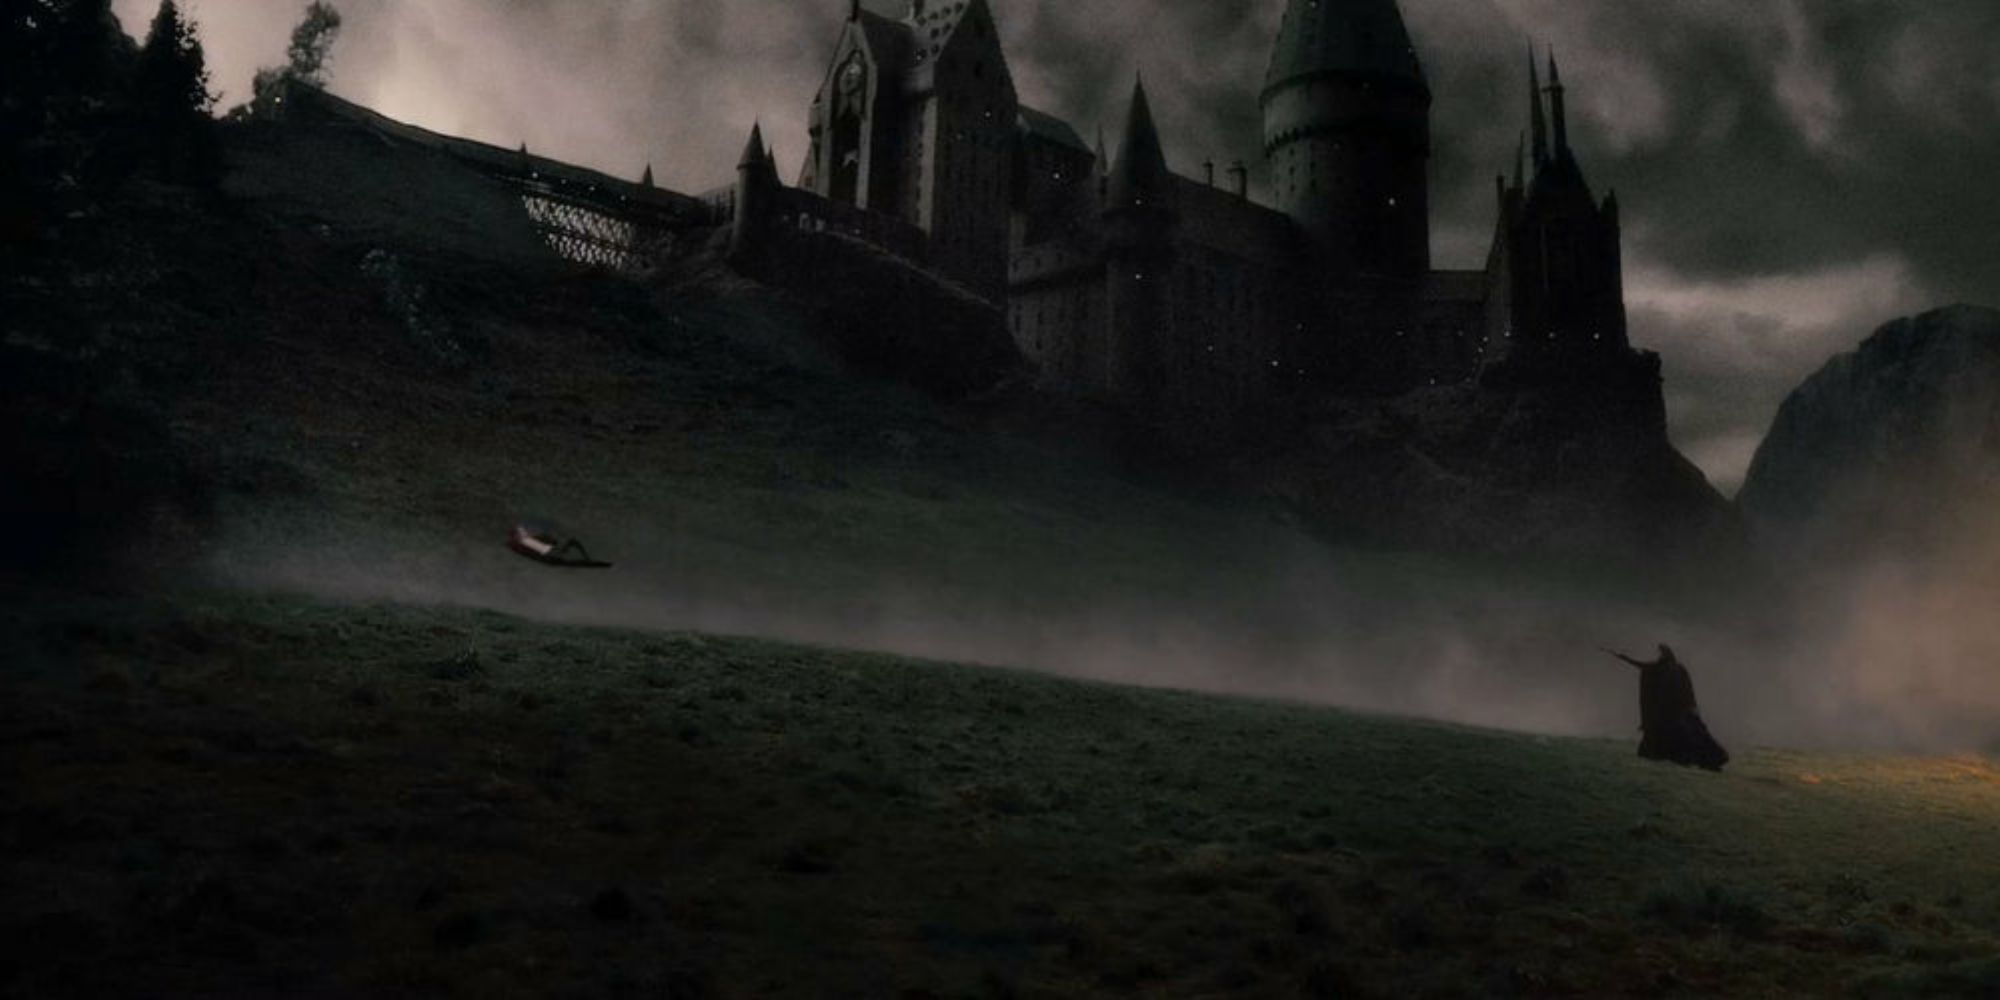 Harry duels Snape in Harry Potter & The Half-Blood Prince